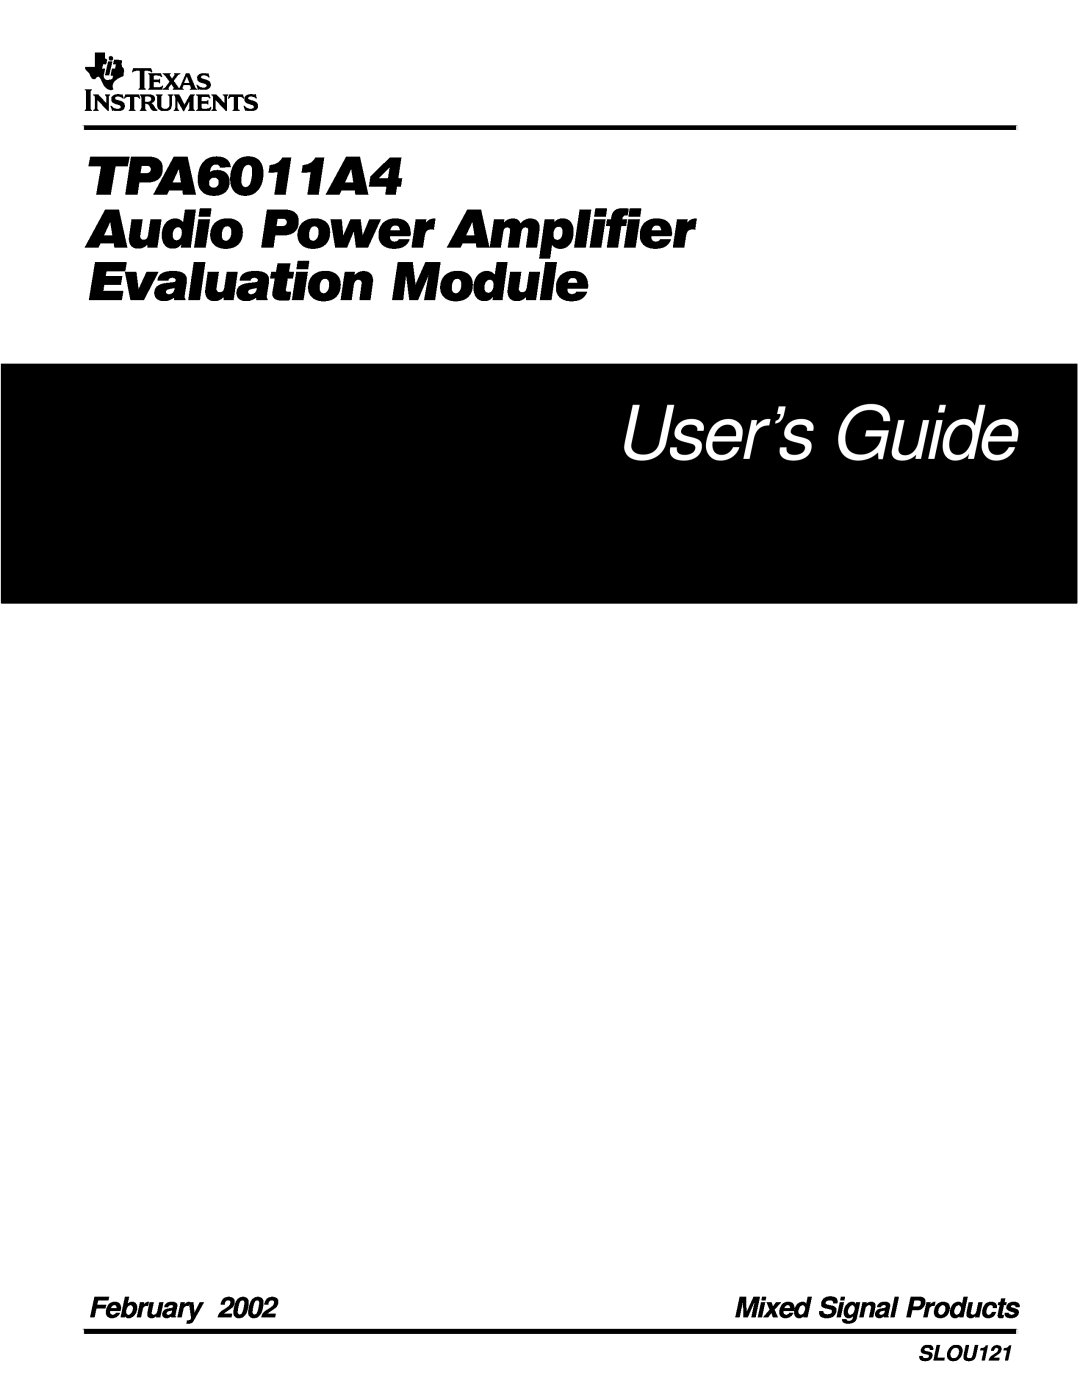 Texas Instruments SLOU121 manual User’s Guide, TPA6011A4 Audio Power Amplifier Evaluation Module, February 